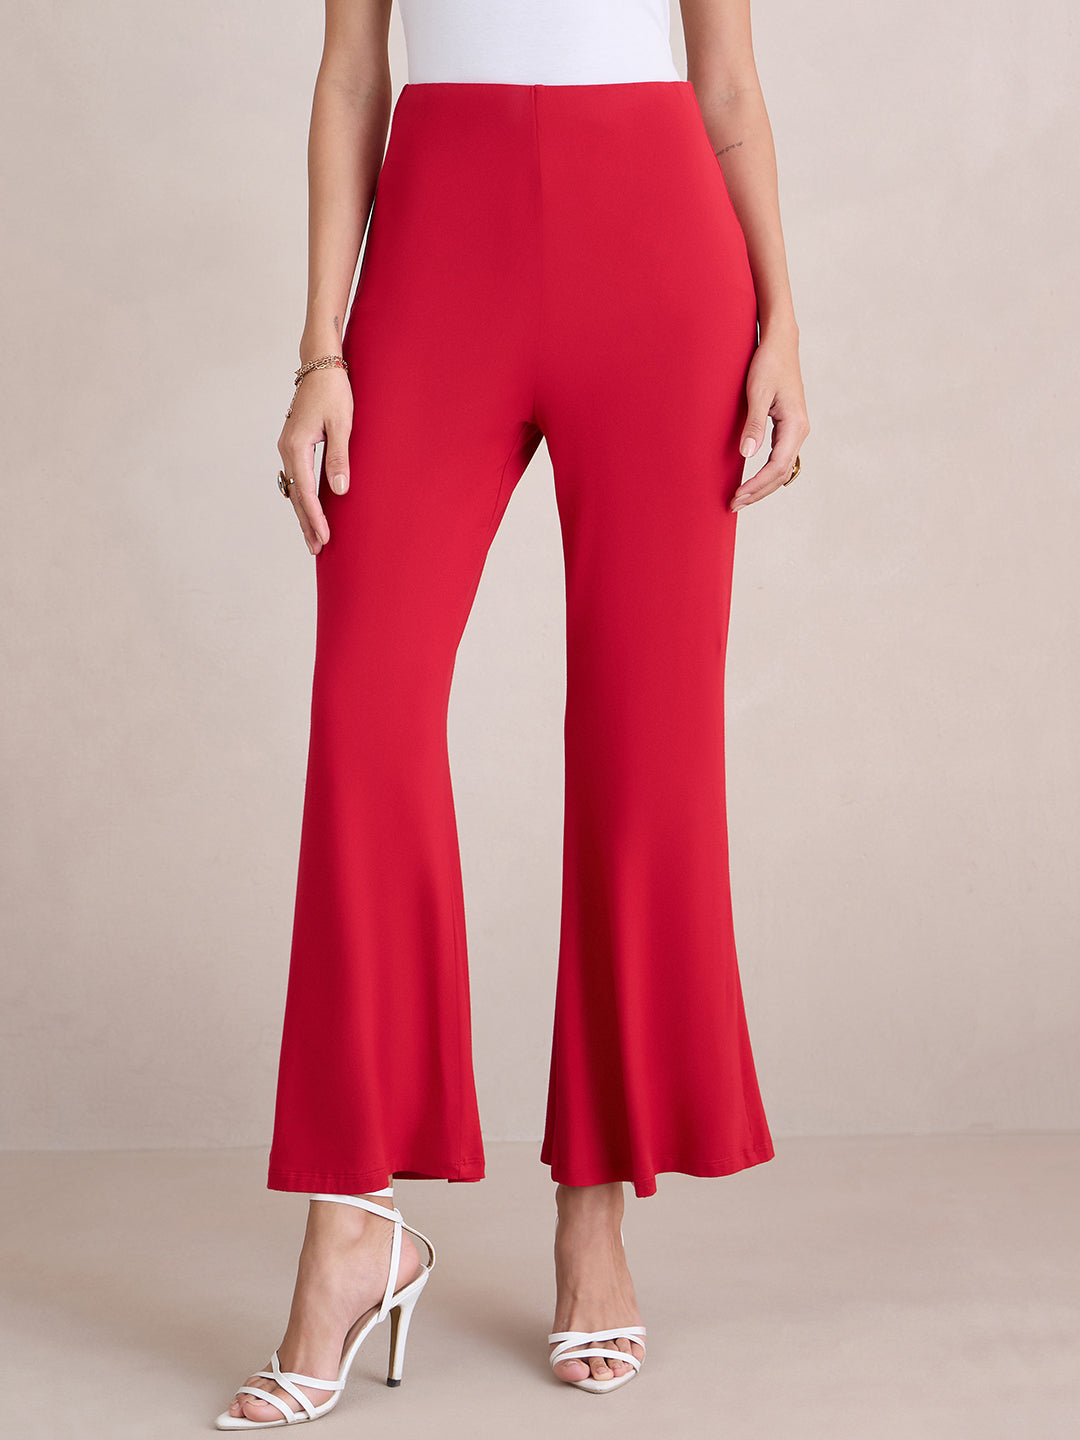 Red Knit Flared Pants